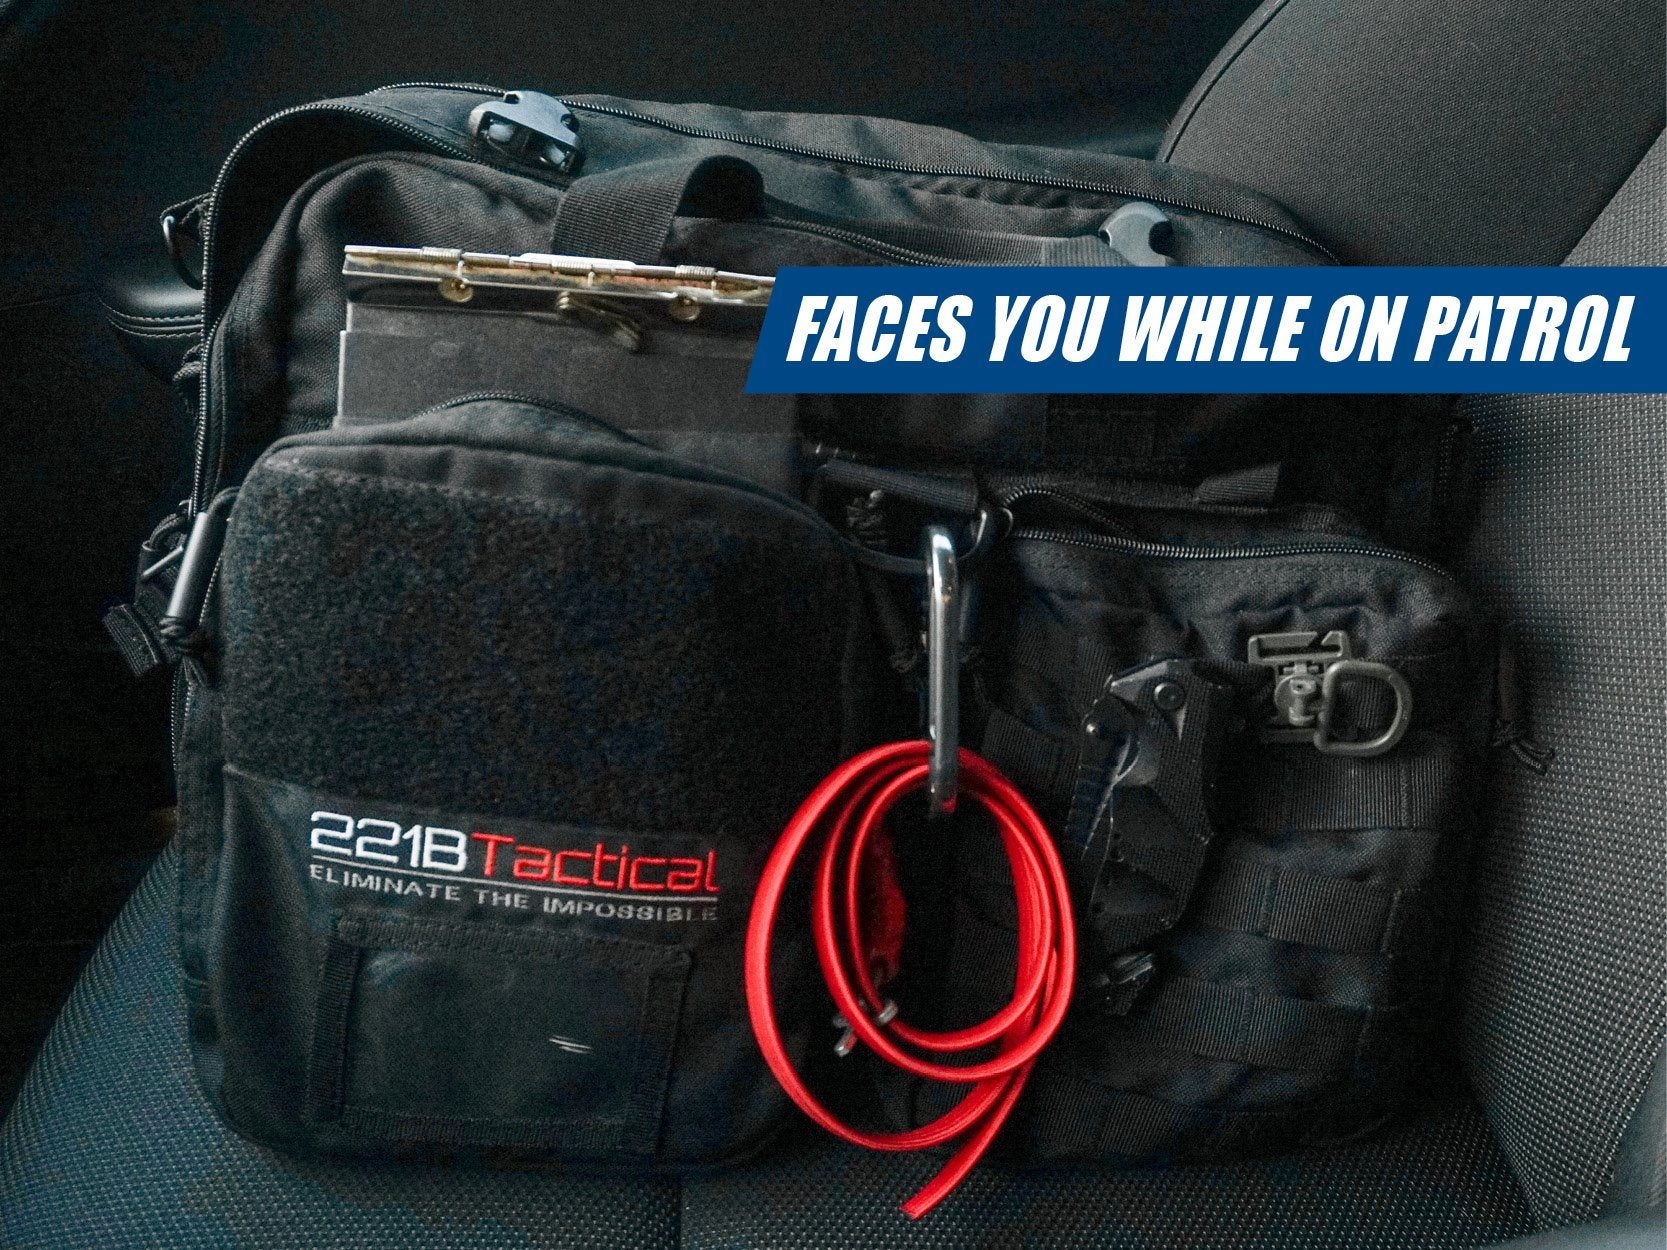 The Best Patrol Bag You Can Have In Your Patrol Car - That Can Actually Help Save Your Life